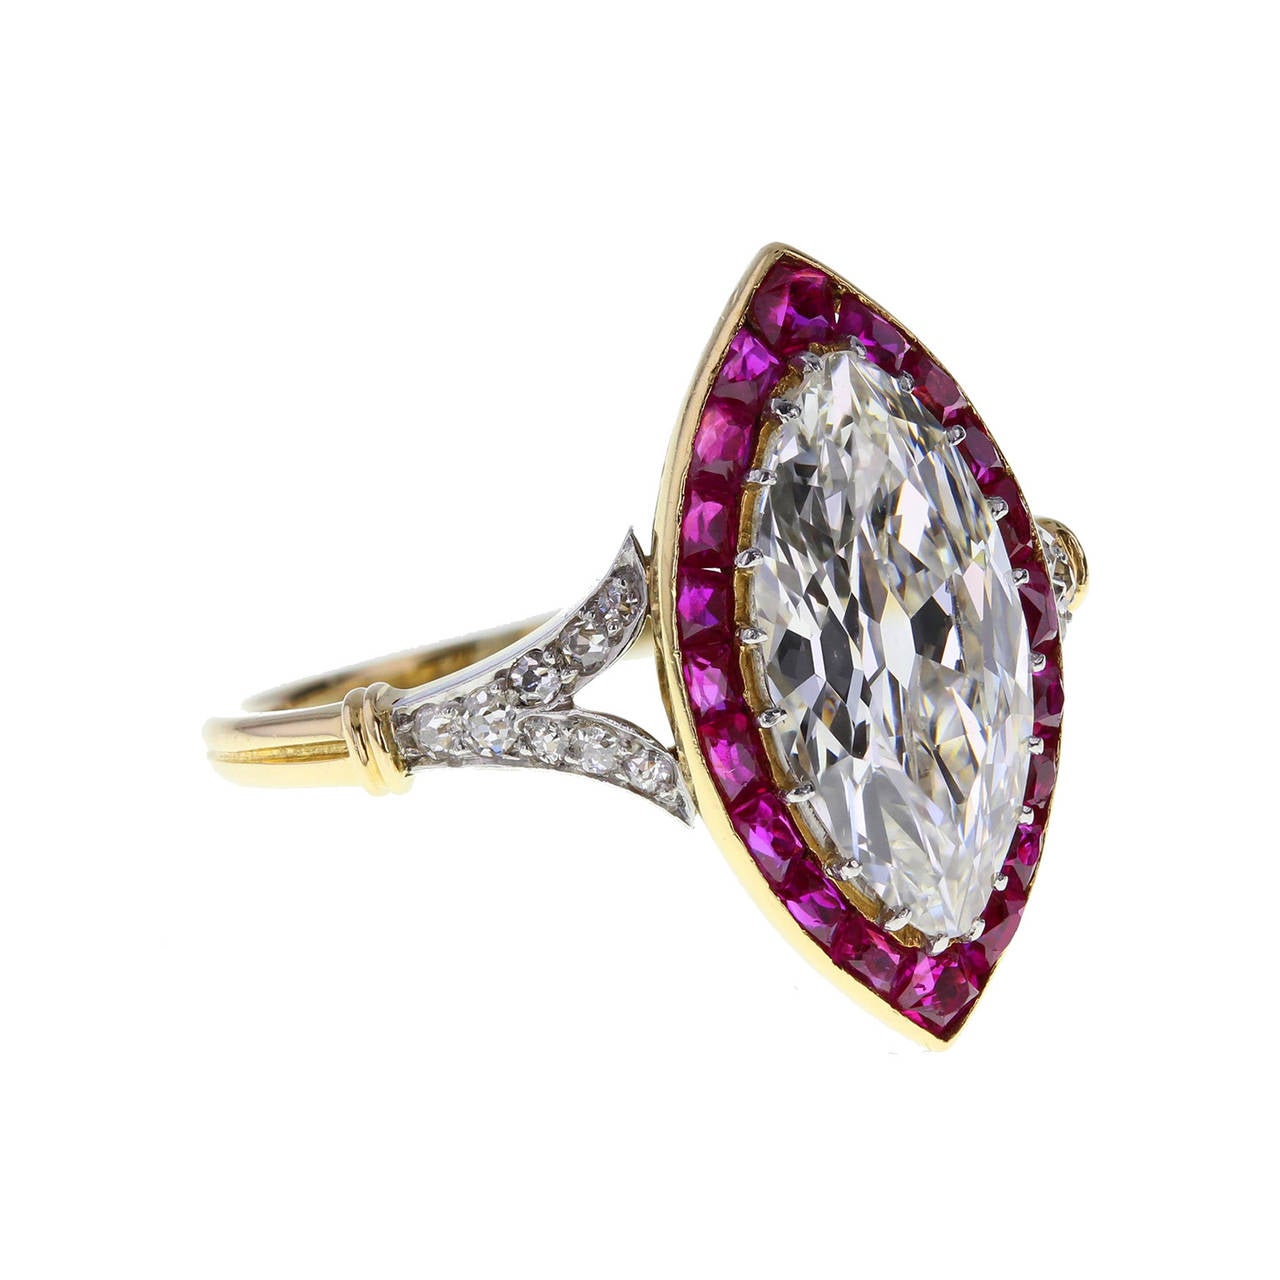 A Belle Epoque platinum and 18ct gold diamond and ruby cluster ring. Circa 1893. The marquise-cut 1.40 carat diamond within a calibre-cut ruby surround, to old-cut diamond bifurcated shoulders and reeded band. Accompanied by a leather folder from